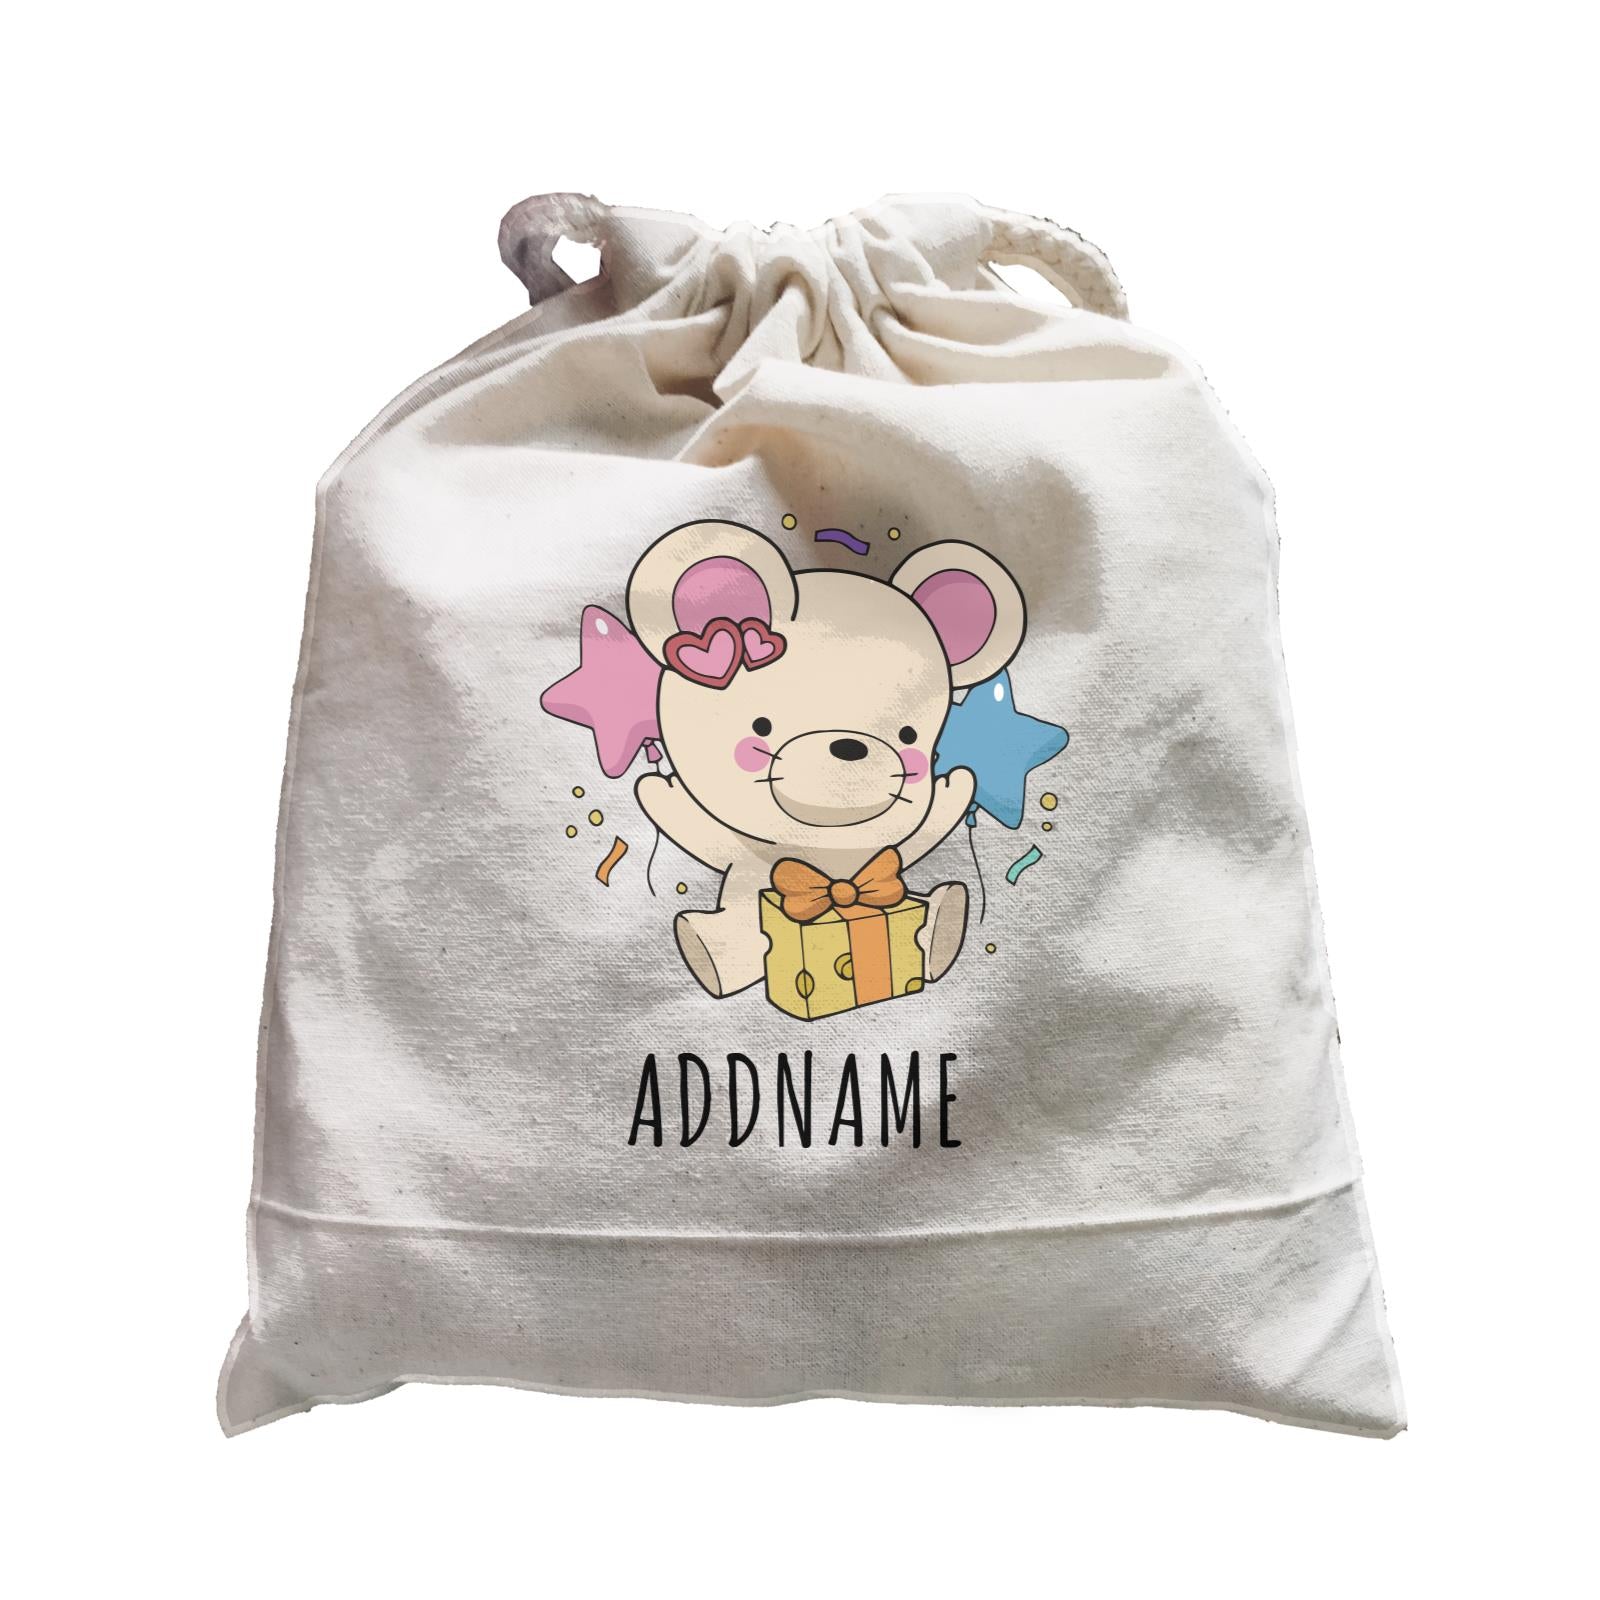 Birthday Sketch Animals Mouse with Cheese Present Addname Satchel